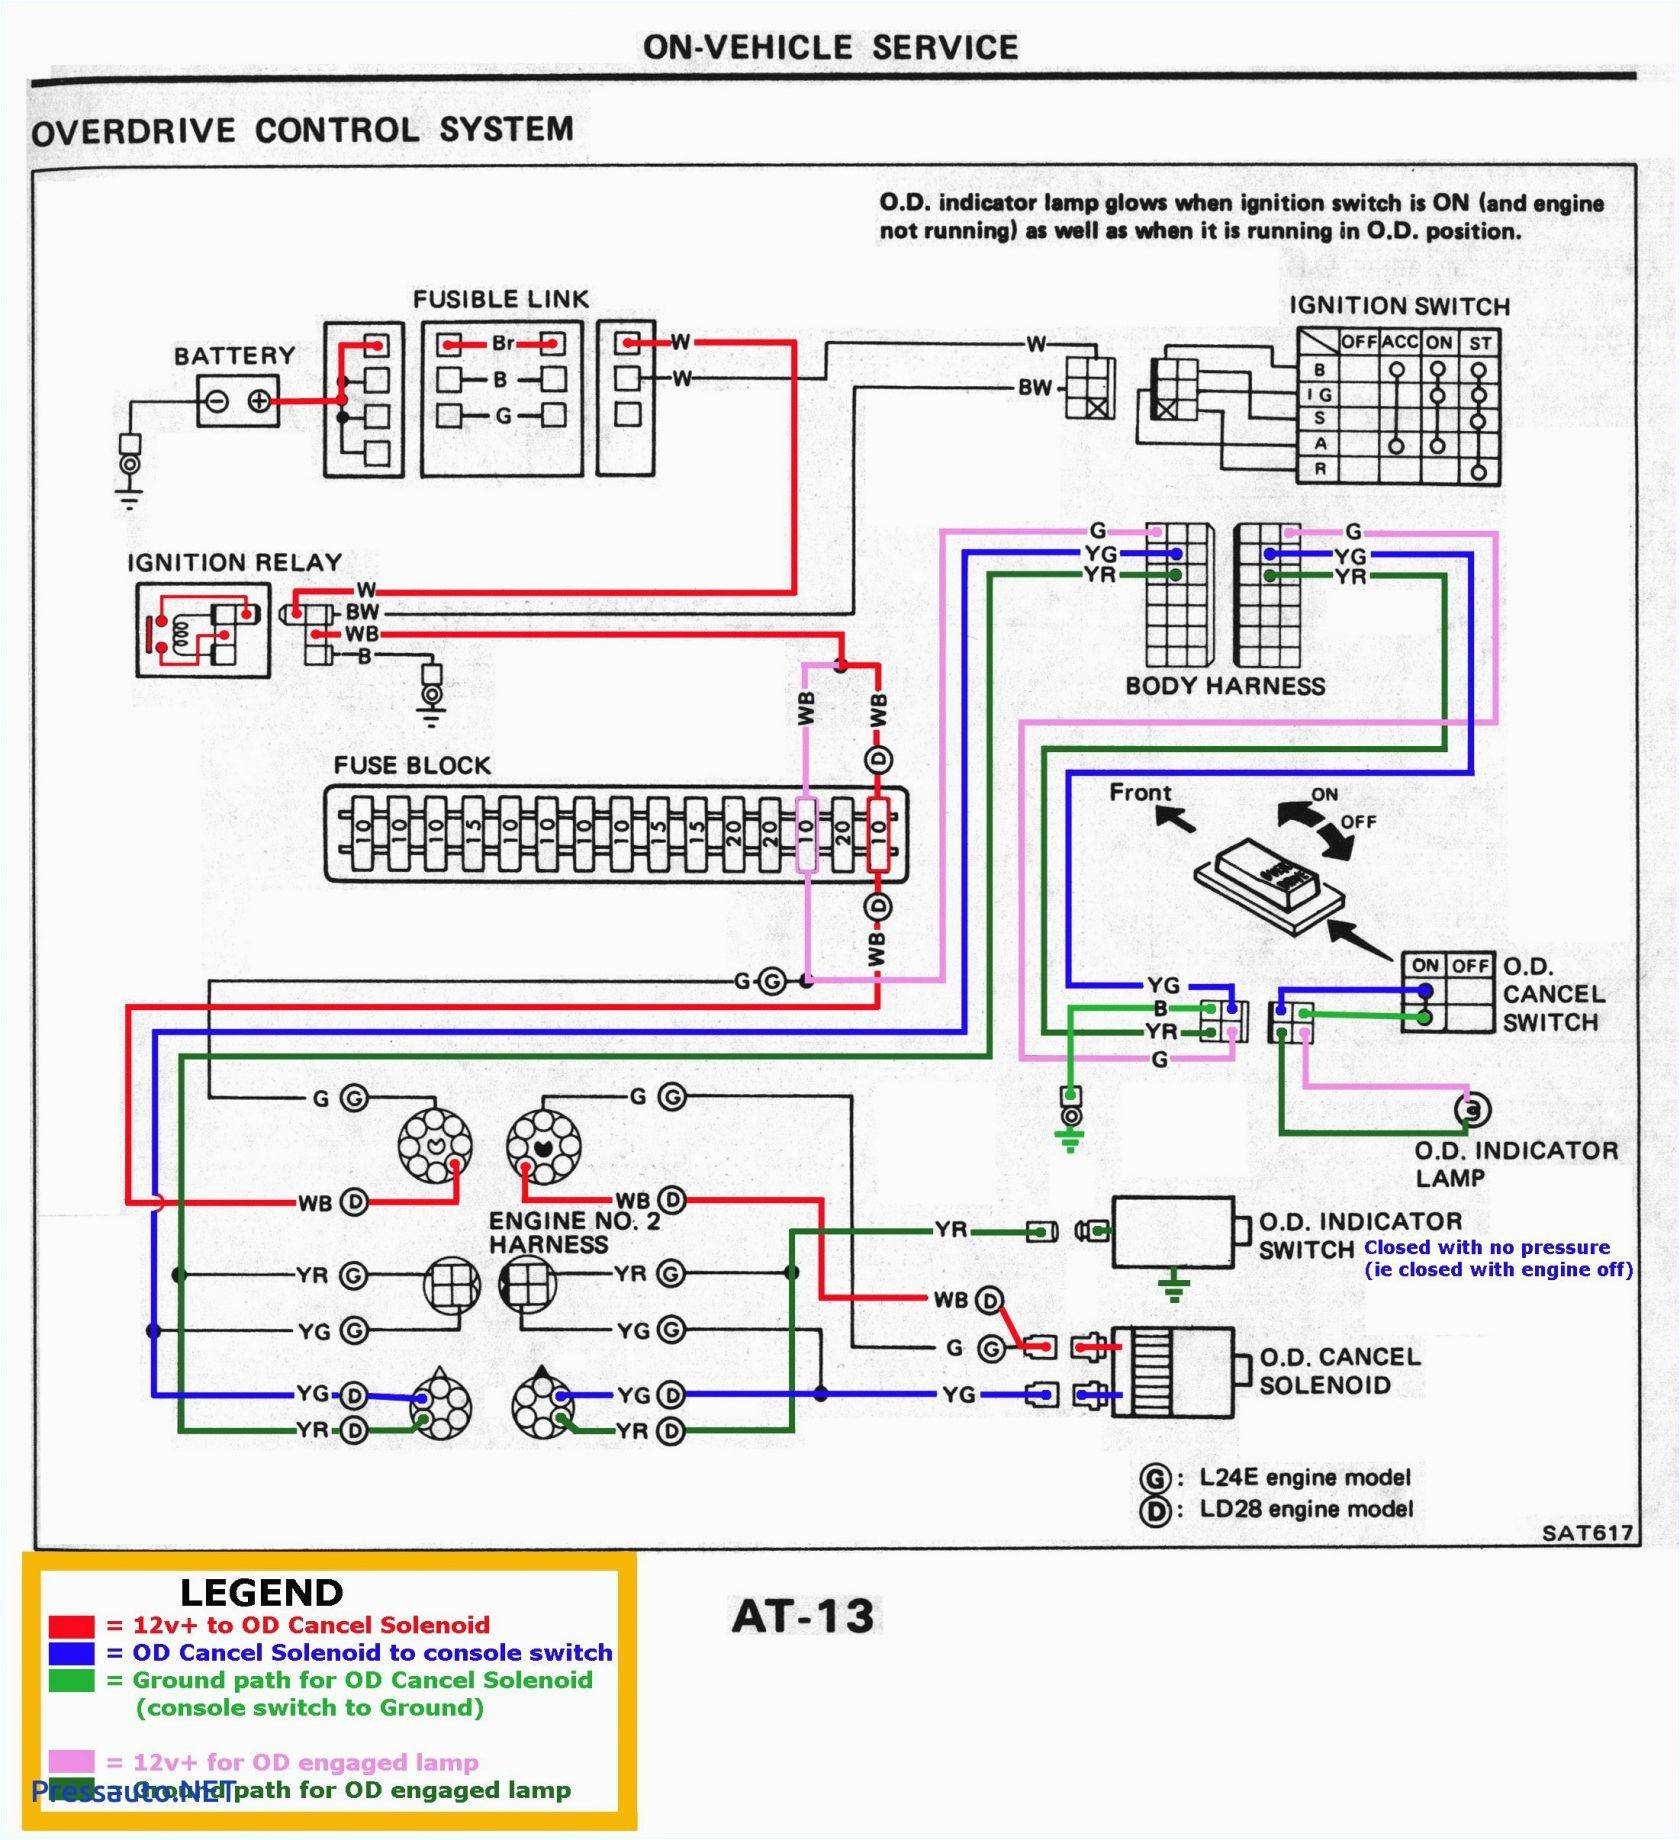 s le wiring diagram wiring diagram local s max wiring diagram cool diagram ideas wiring diagram